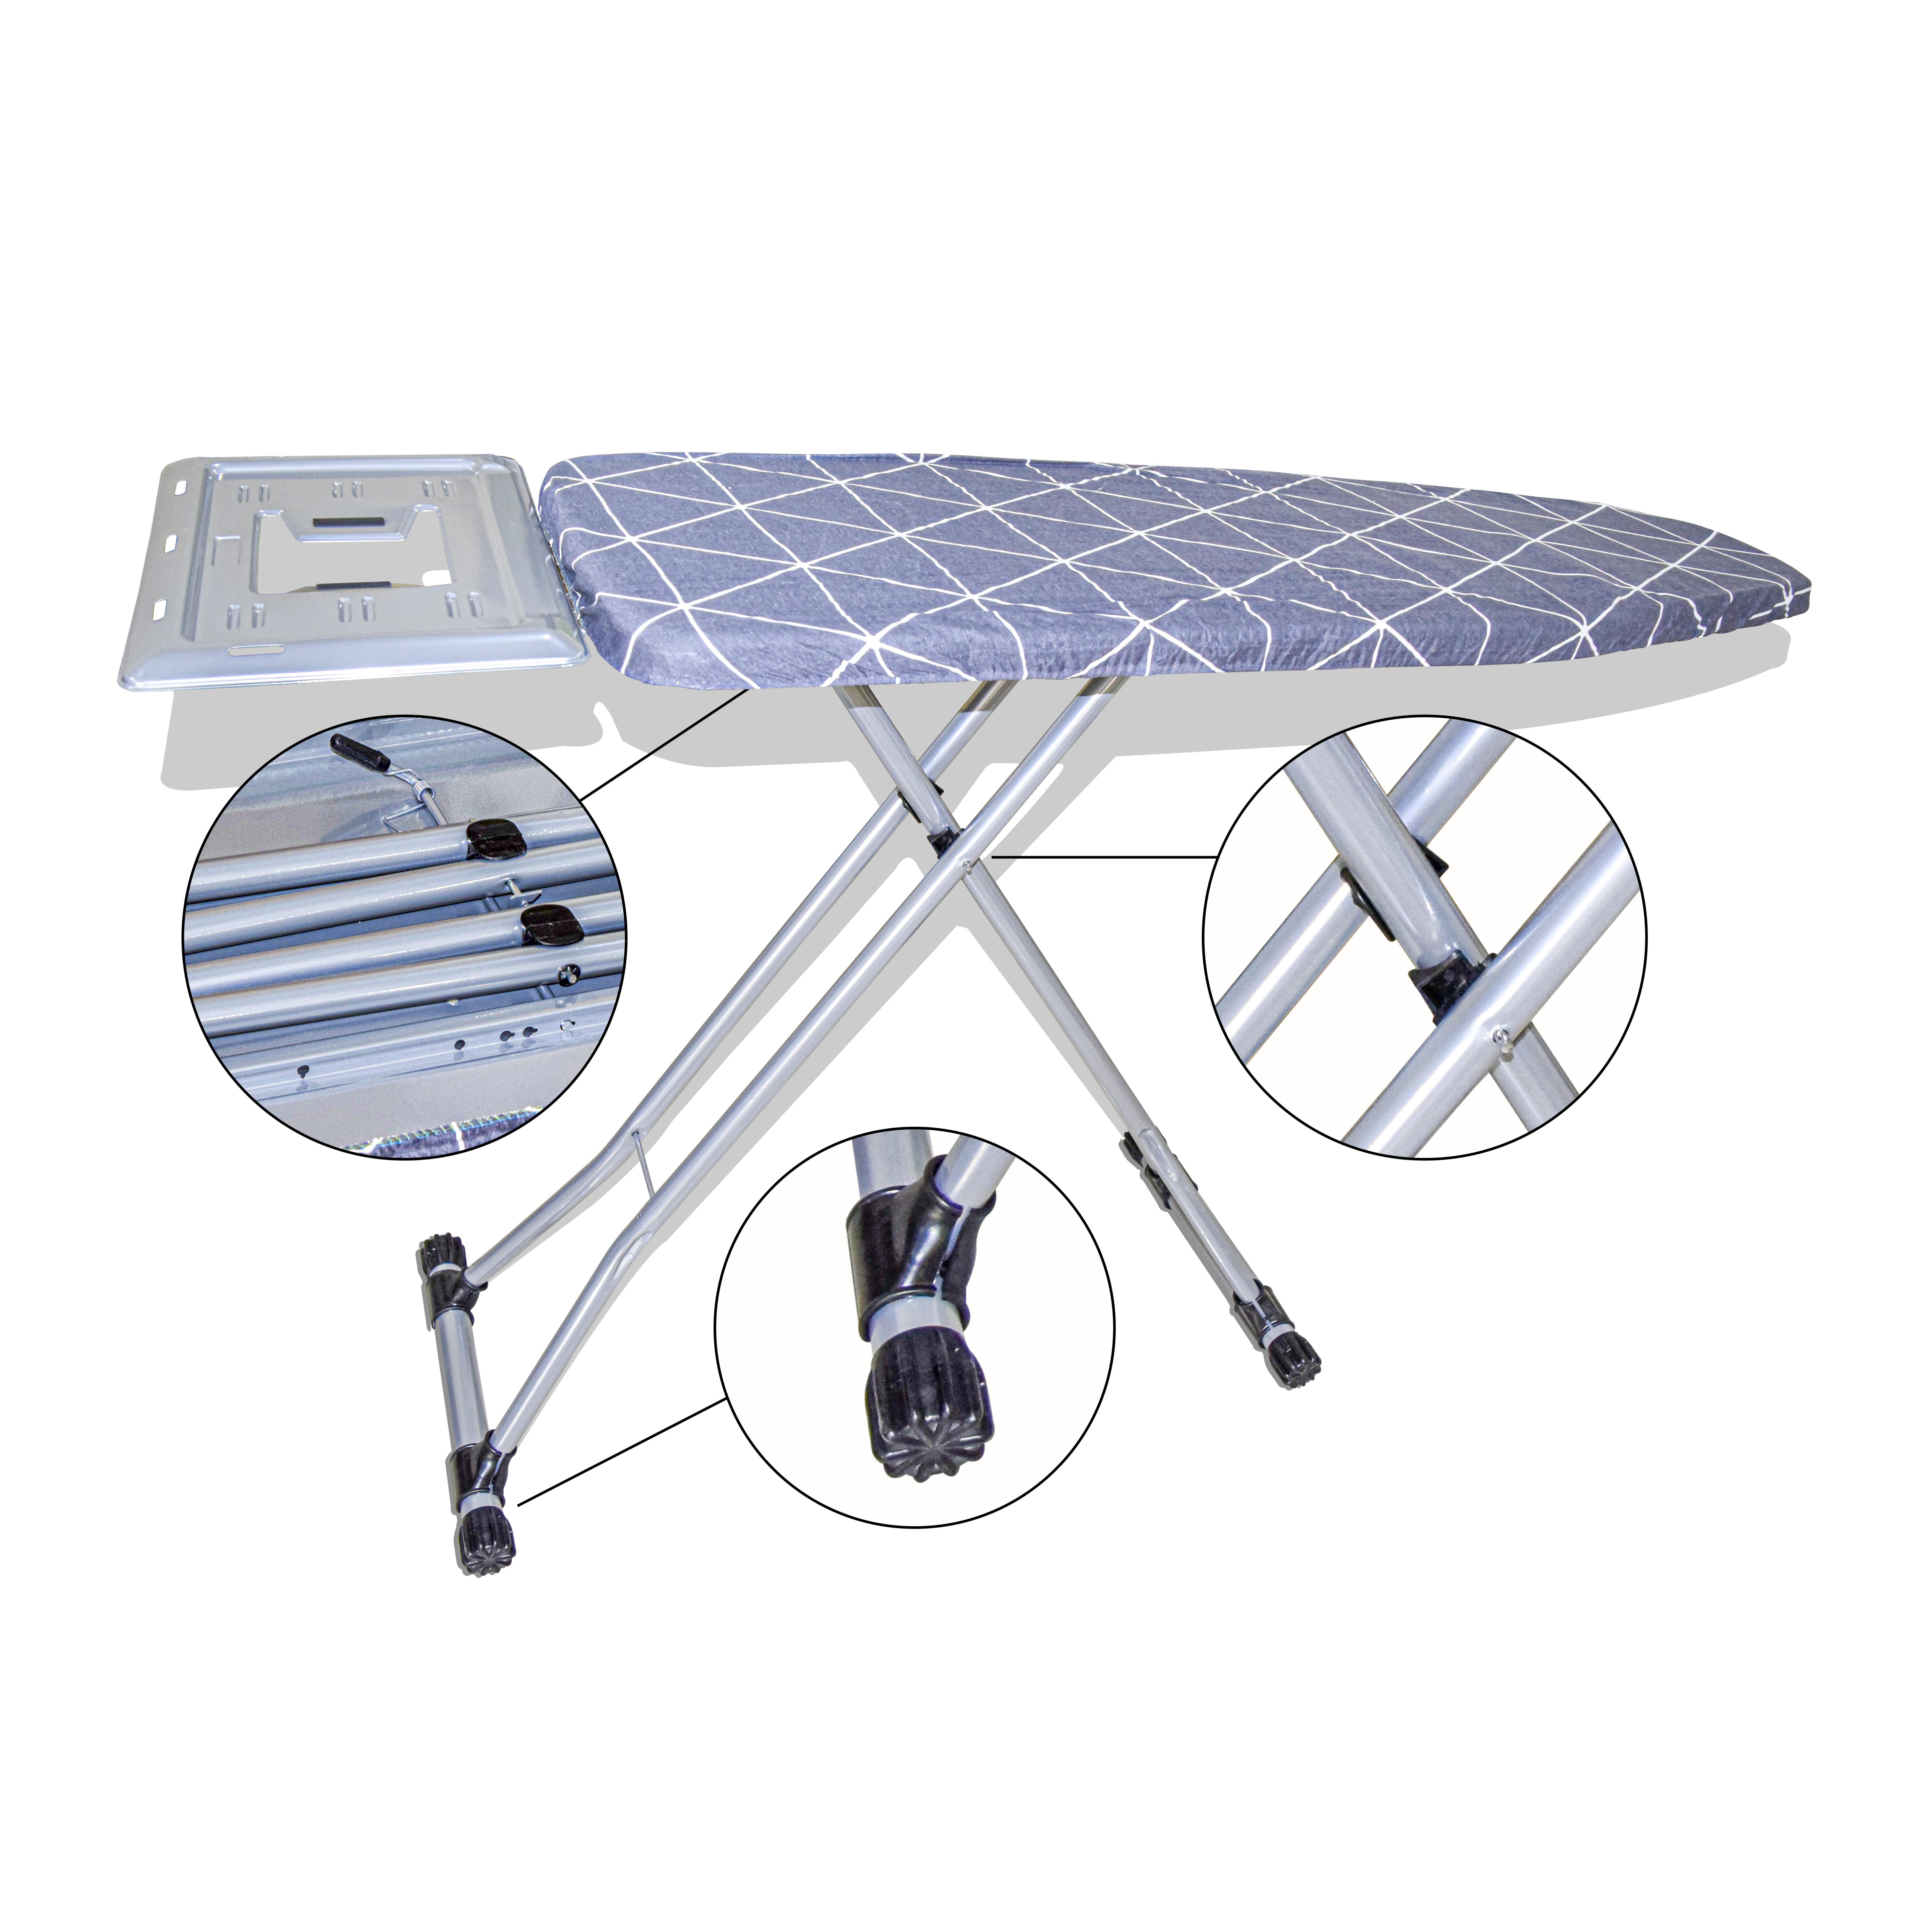 AKC |Stainless Steel Ironing Board 37 x 117